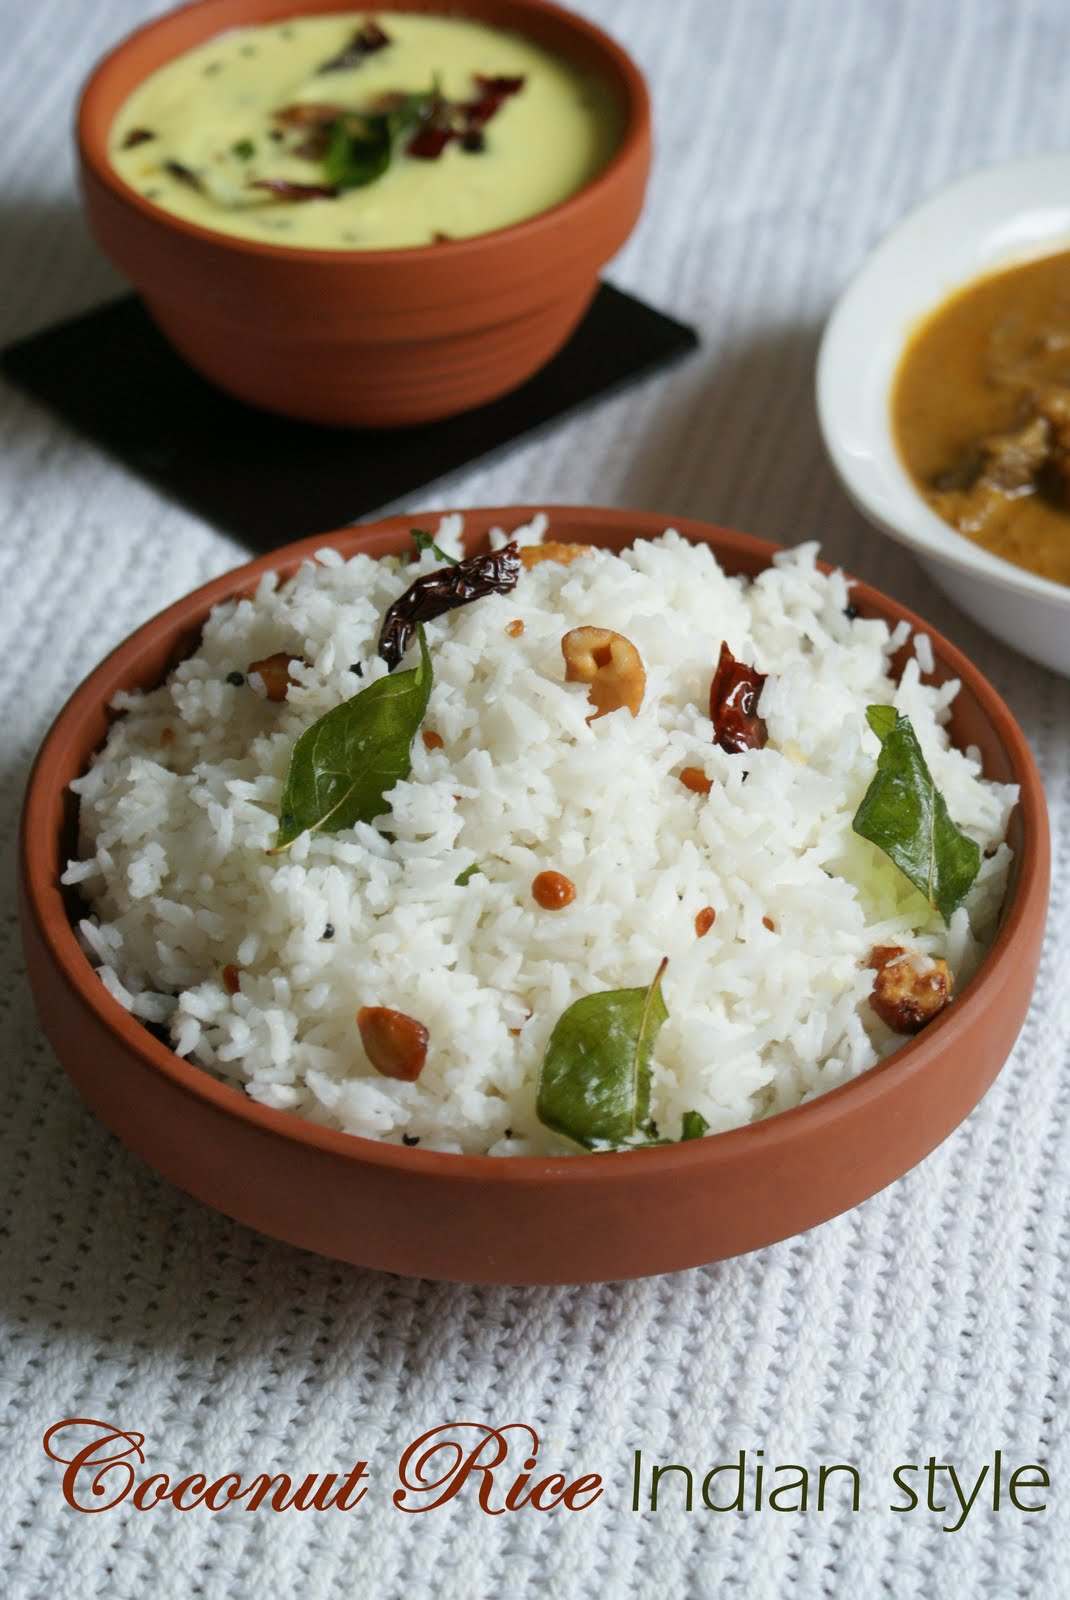 Shab's Cuisine: Coconut rice – South Indian style.